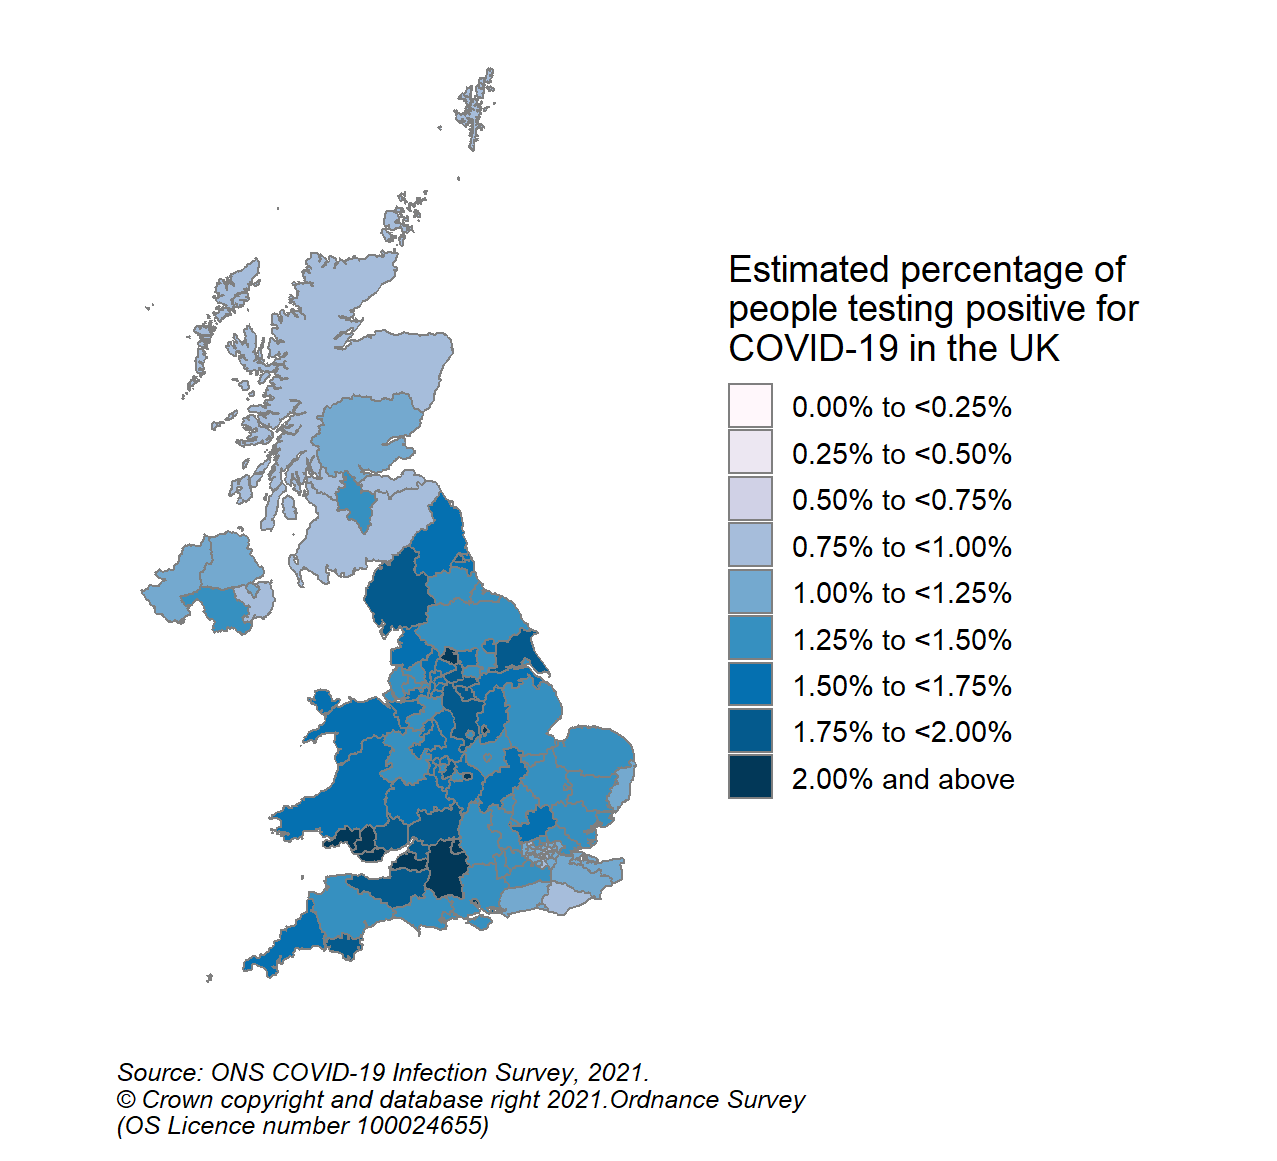 This colour coded map of the UK shows the modelled estimates of the percentage of the private residential population testing positive for COVID-19, by COVID-19 Infection Survey sub-regions. In Scotland, these sub-regions are comprised of Health Boards. The regions are: 123 - NHS Grampian, NHS Highland, NHS Orkney, NHS Shetland and NHS Western Isles, 124 - NHS Fife, NHS Forth Valley and NHS Tayside, 125 - NHS Greater Glasgow & Clyde, 126 - NHS Lothian, 127 - NHS Lanarkshire, 128 - NHS Ayrshire & Arran, NHS Borders and NHS Dumfries & Galloway.  The sub-region with the highest modelled estimate for the percentage of people testing positive was CIS Region 127 (NHS Lanarkshire) at 1.36% (95% credible interval: 1.09% to 1.70%).  The sub-region with the lowest modelled estimate was Region 123 (NHS Grampian, NHS Highland, NHS Orkney, NHS Shetland and NHS Western Isles), at 0.81% (95% credible interval: 0.64% to 1.02%).